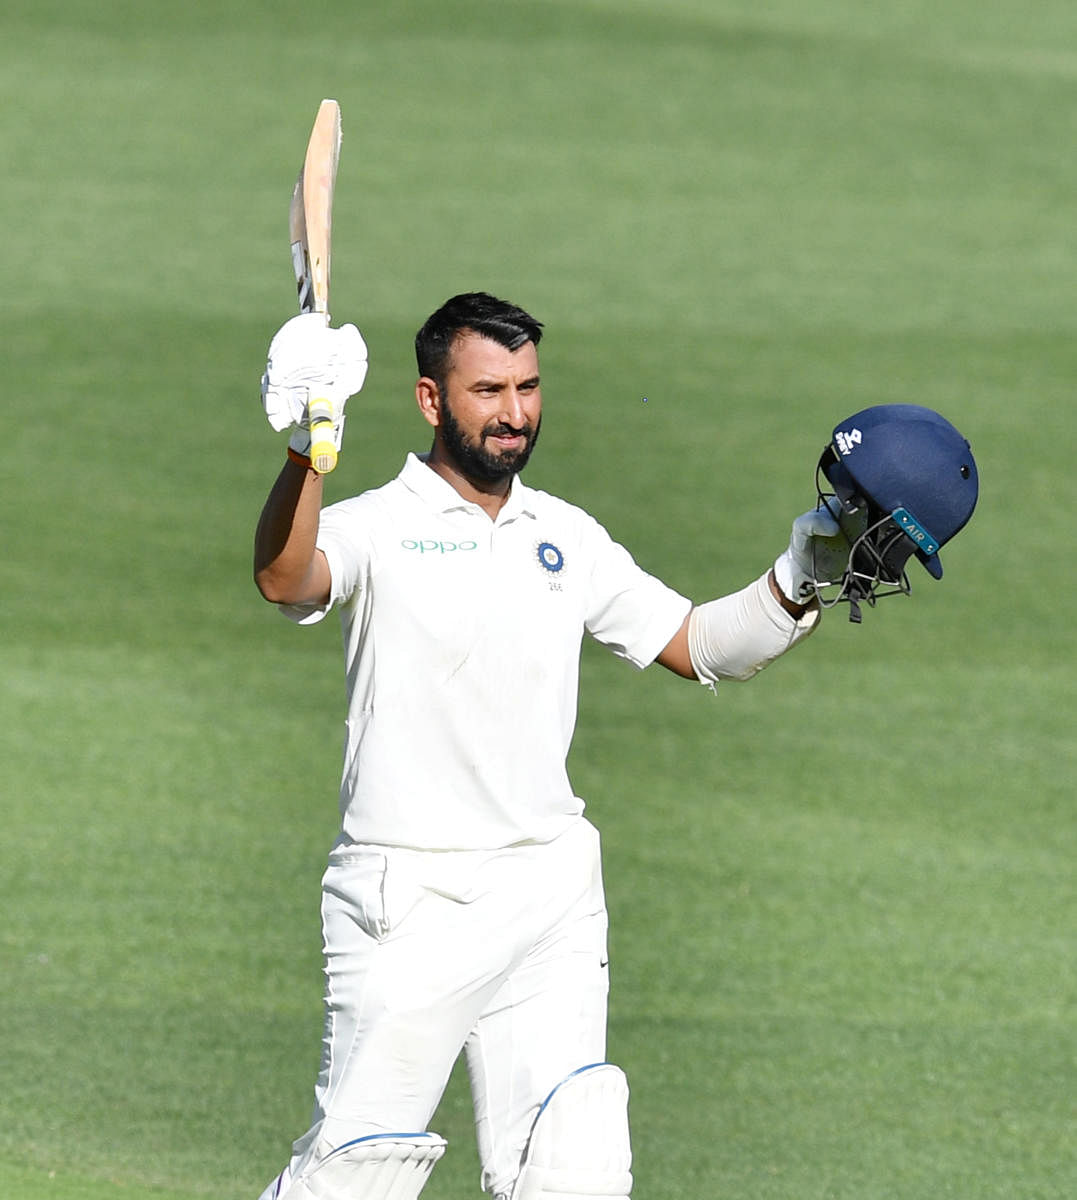 India's Cheteshwar Pujara celebrates after reaching his century against Australia in the first Test in Adelaide on Thursday. Reuters